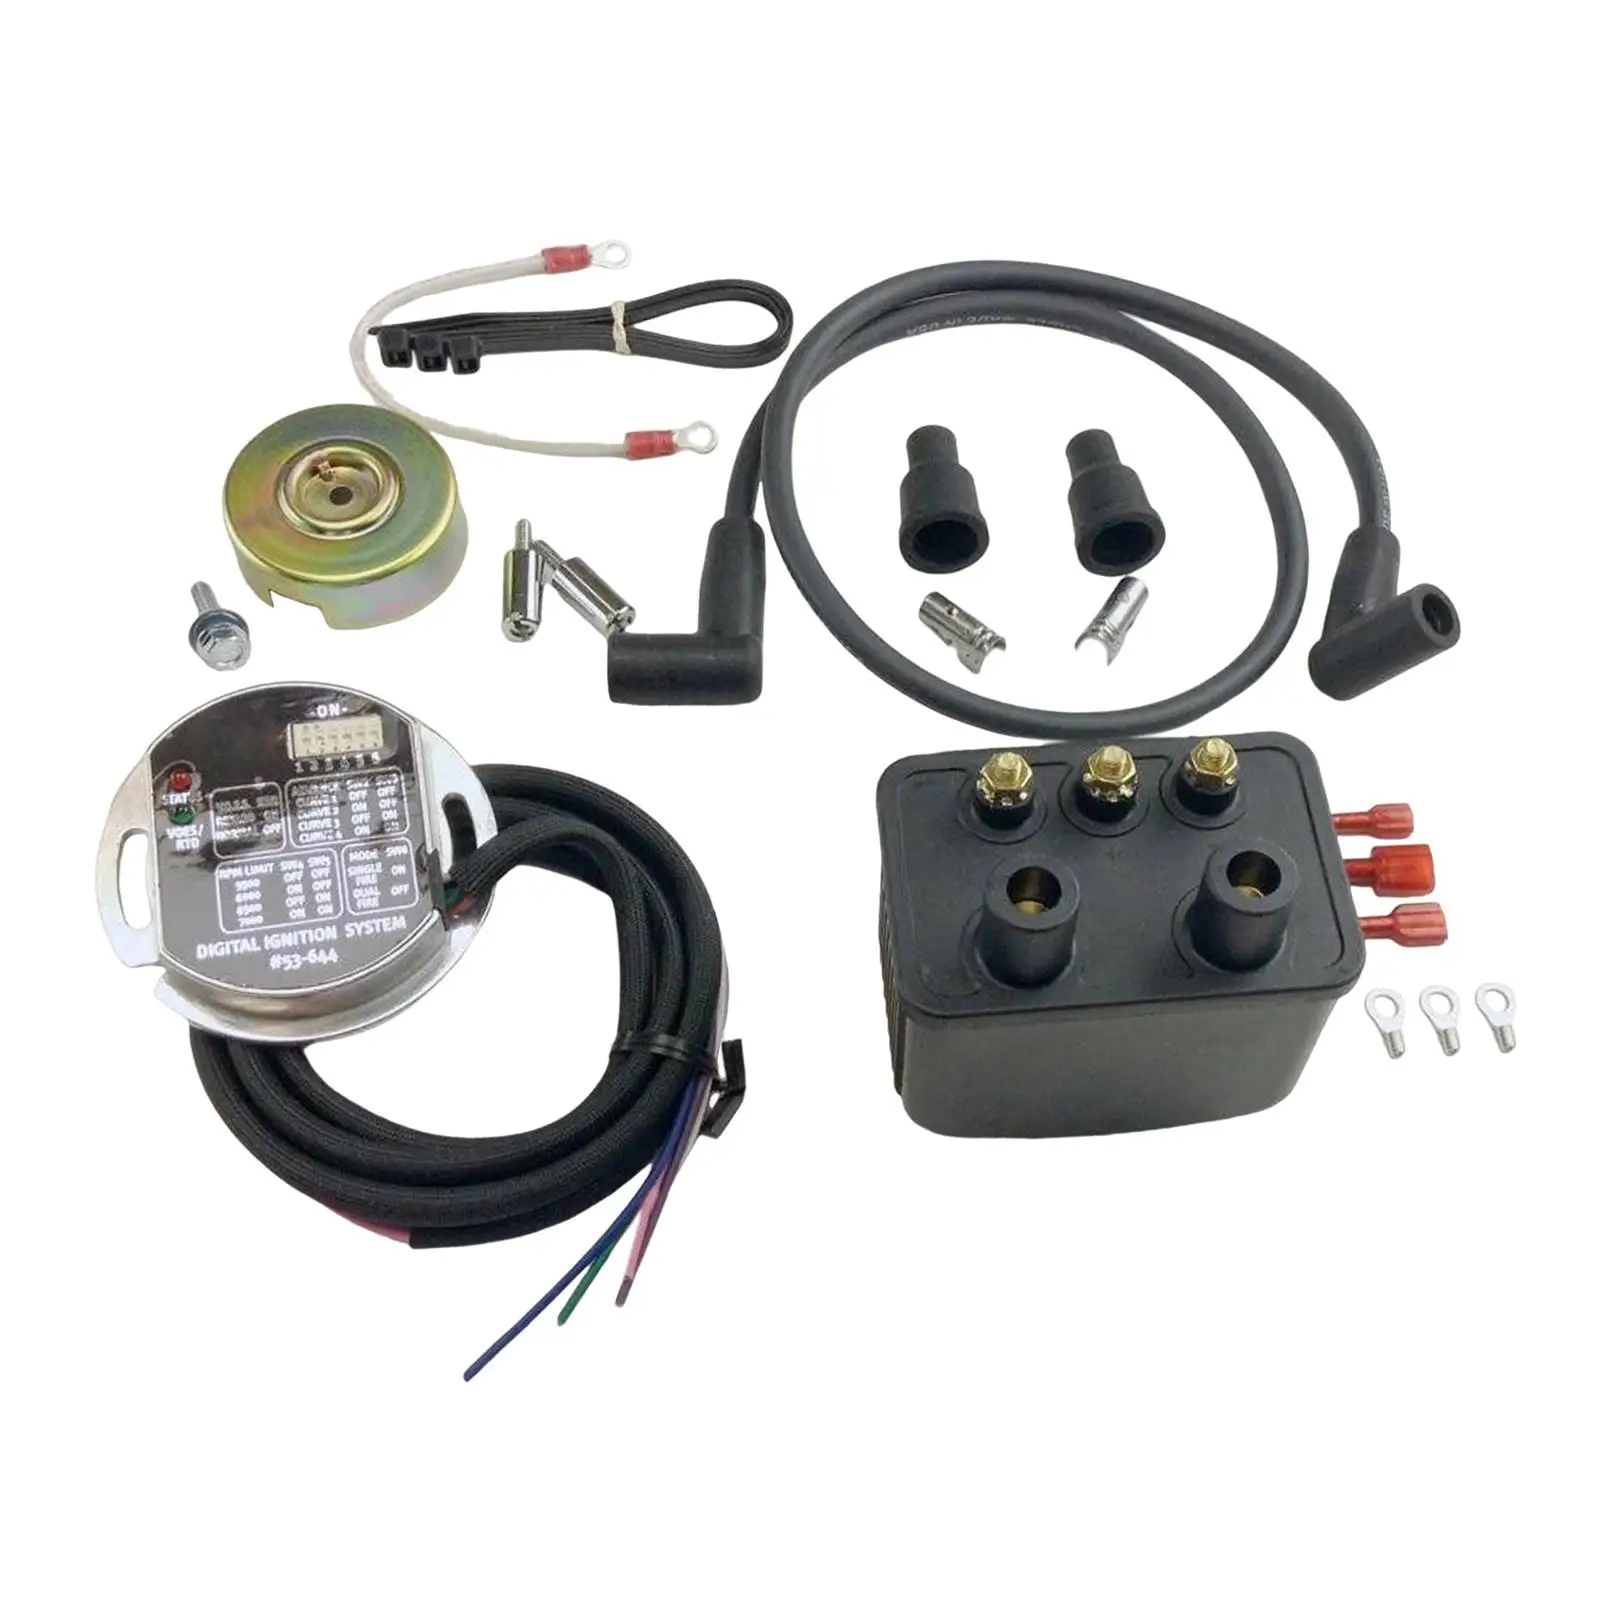 Single Fire Programmable Ignition Kit 53-660 Accessory Replaces for Shovelhead Premium Easy to Install Professional Sturdy